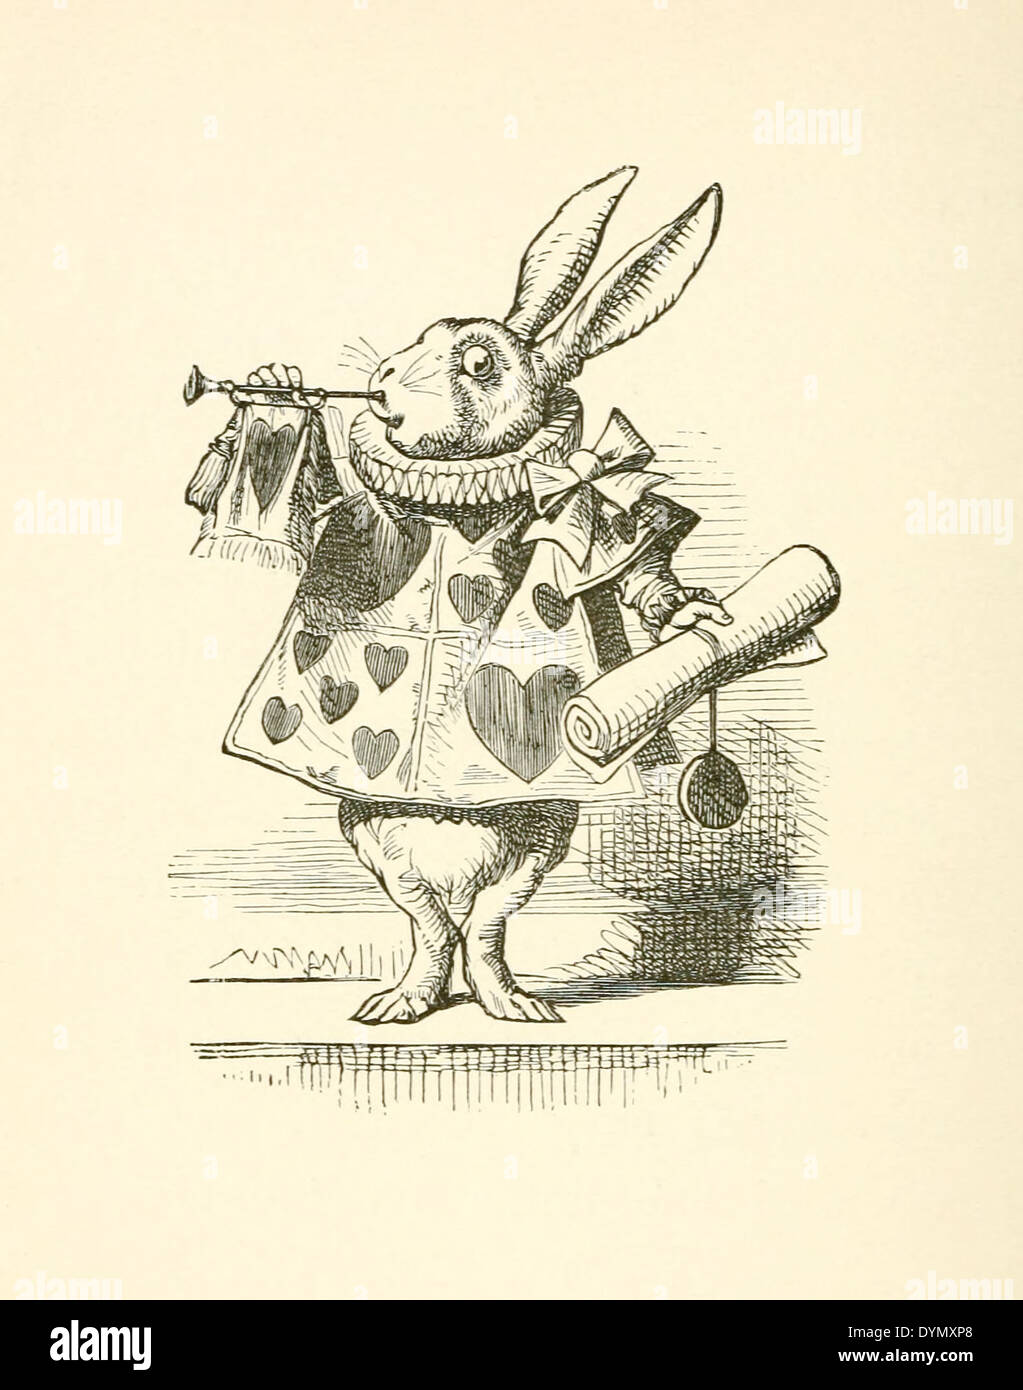 The White Rabbit with trumpet and scroll heralding the accusation, illustration by Sir John Tenniel  (1820-1914) from 'Alice in Wonderland' by Lewis Carroll first published in 1865. See description for more information. Stock Photo